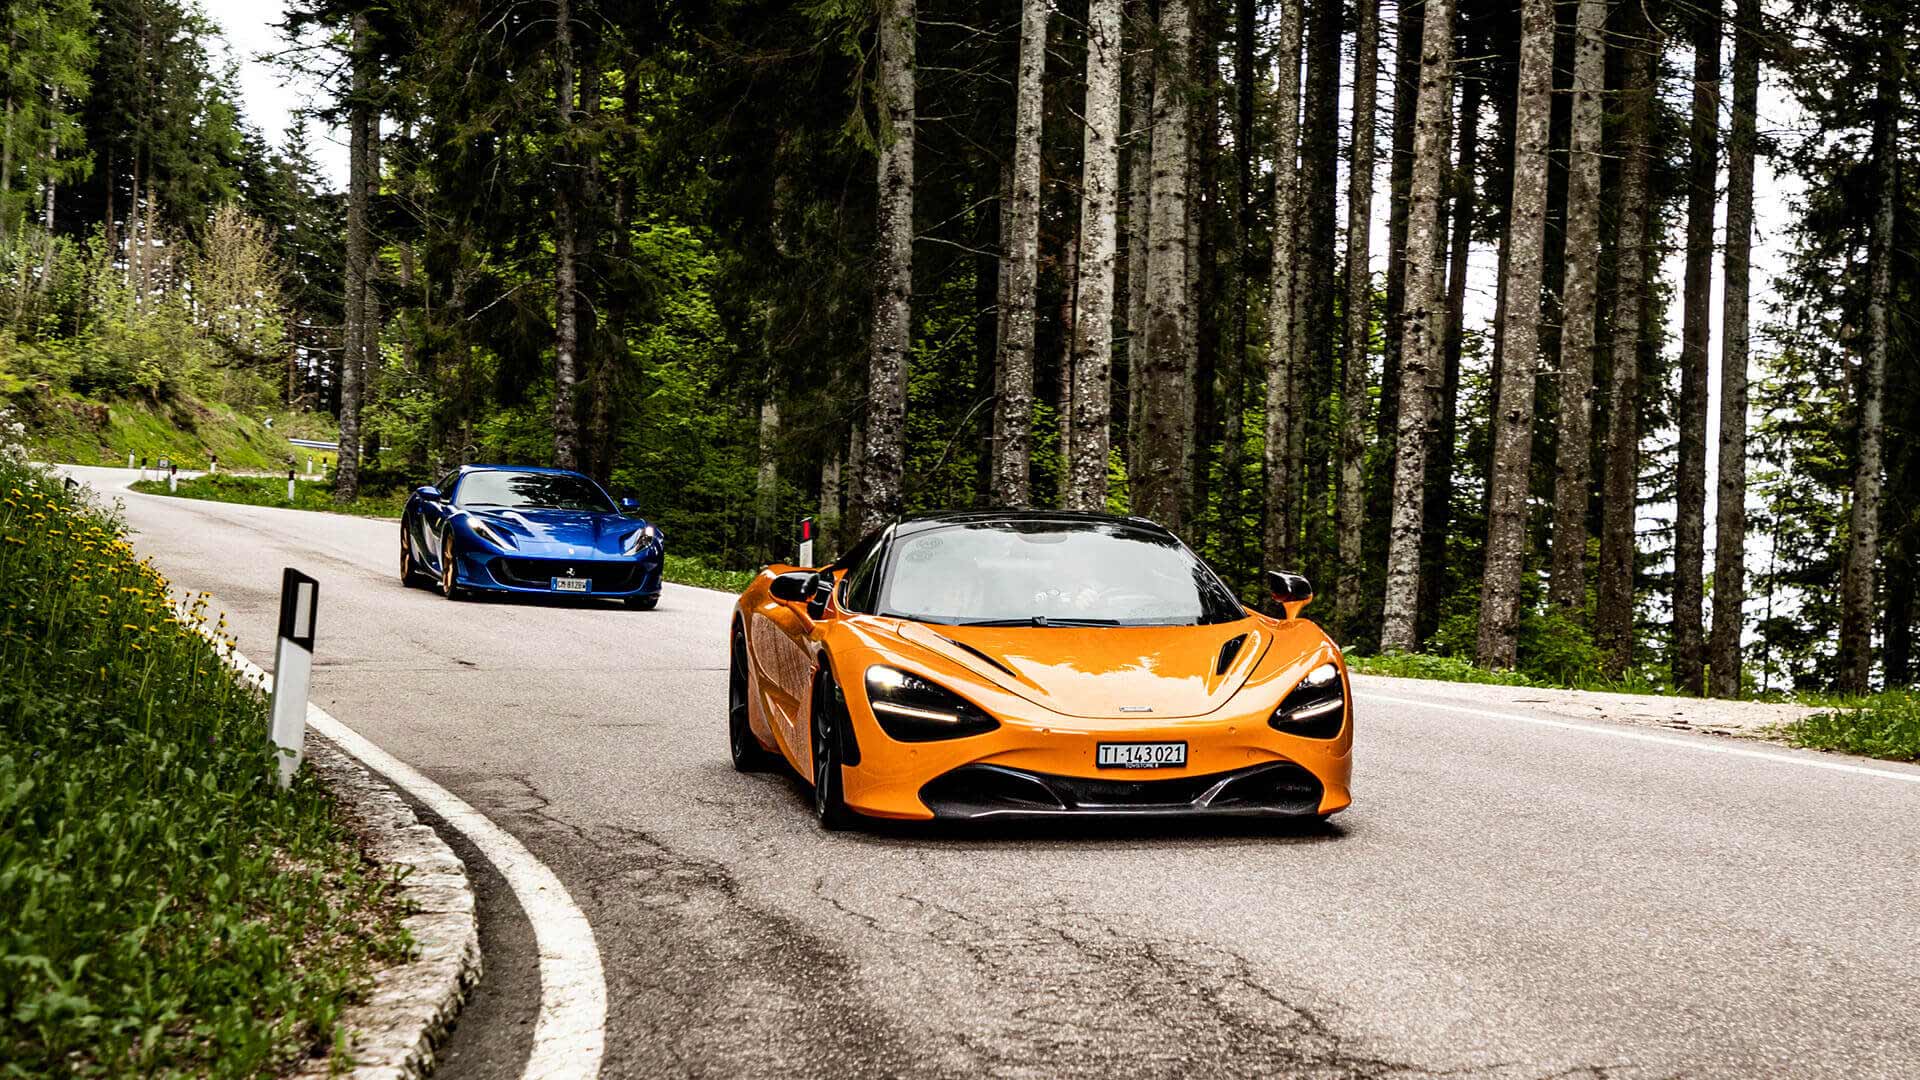 Supercars driving along a pine tree lined road in the Italian Alps